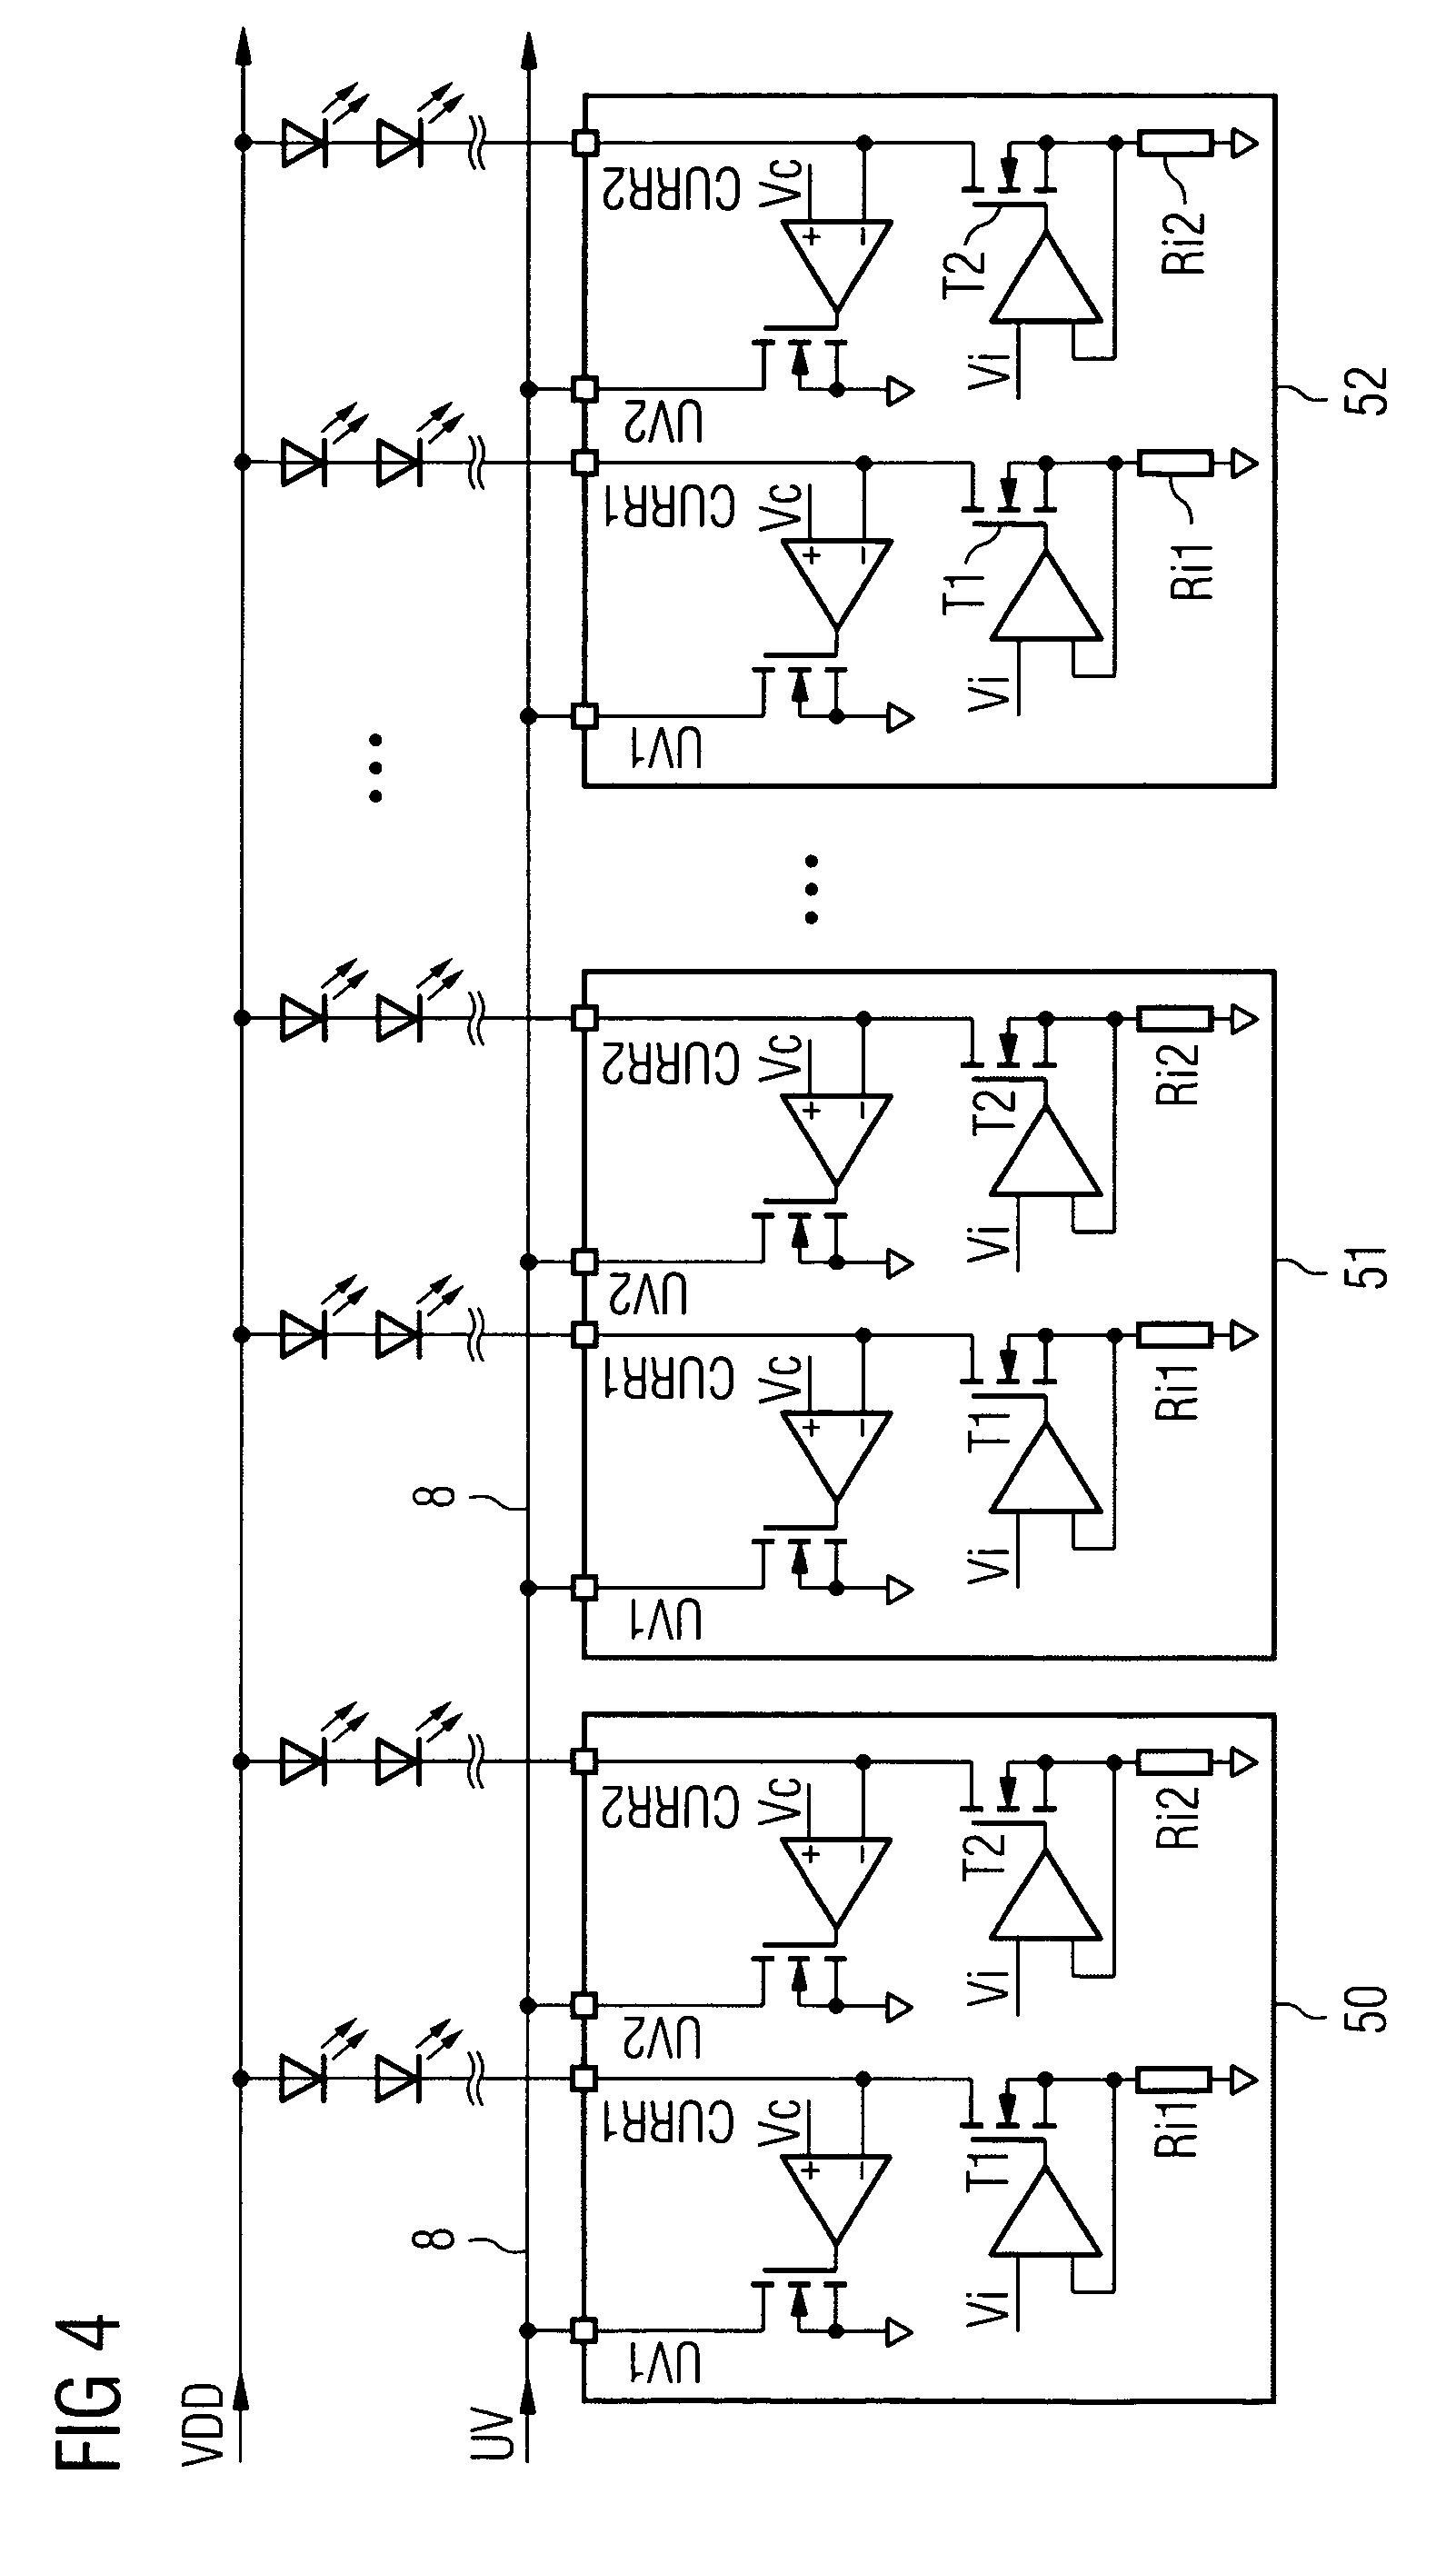 Power supply system and method for the operation of an electrical load